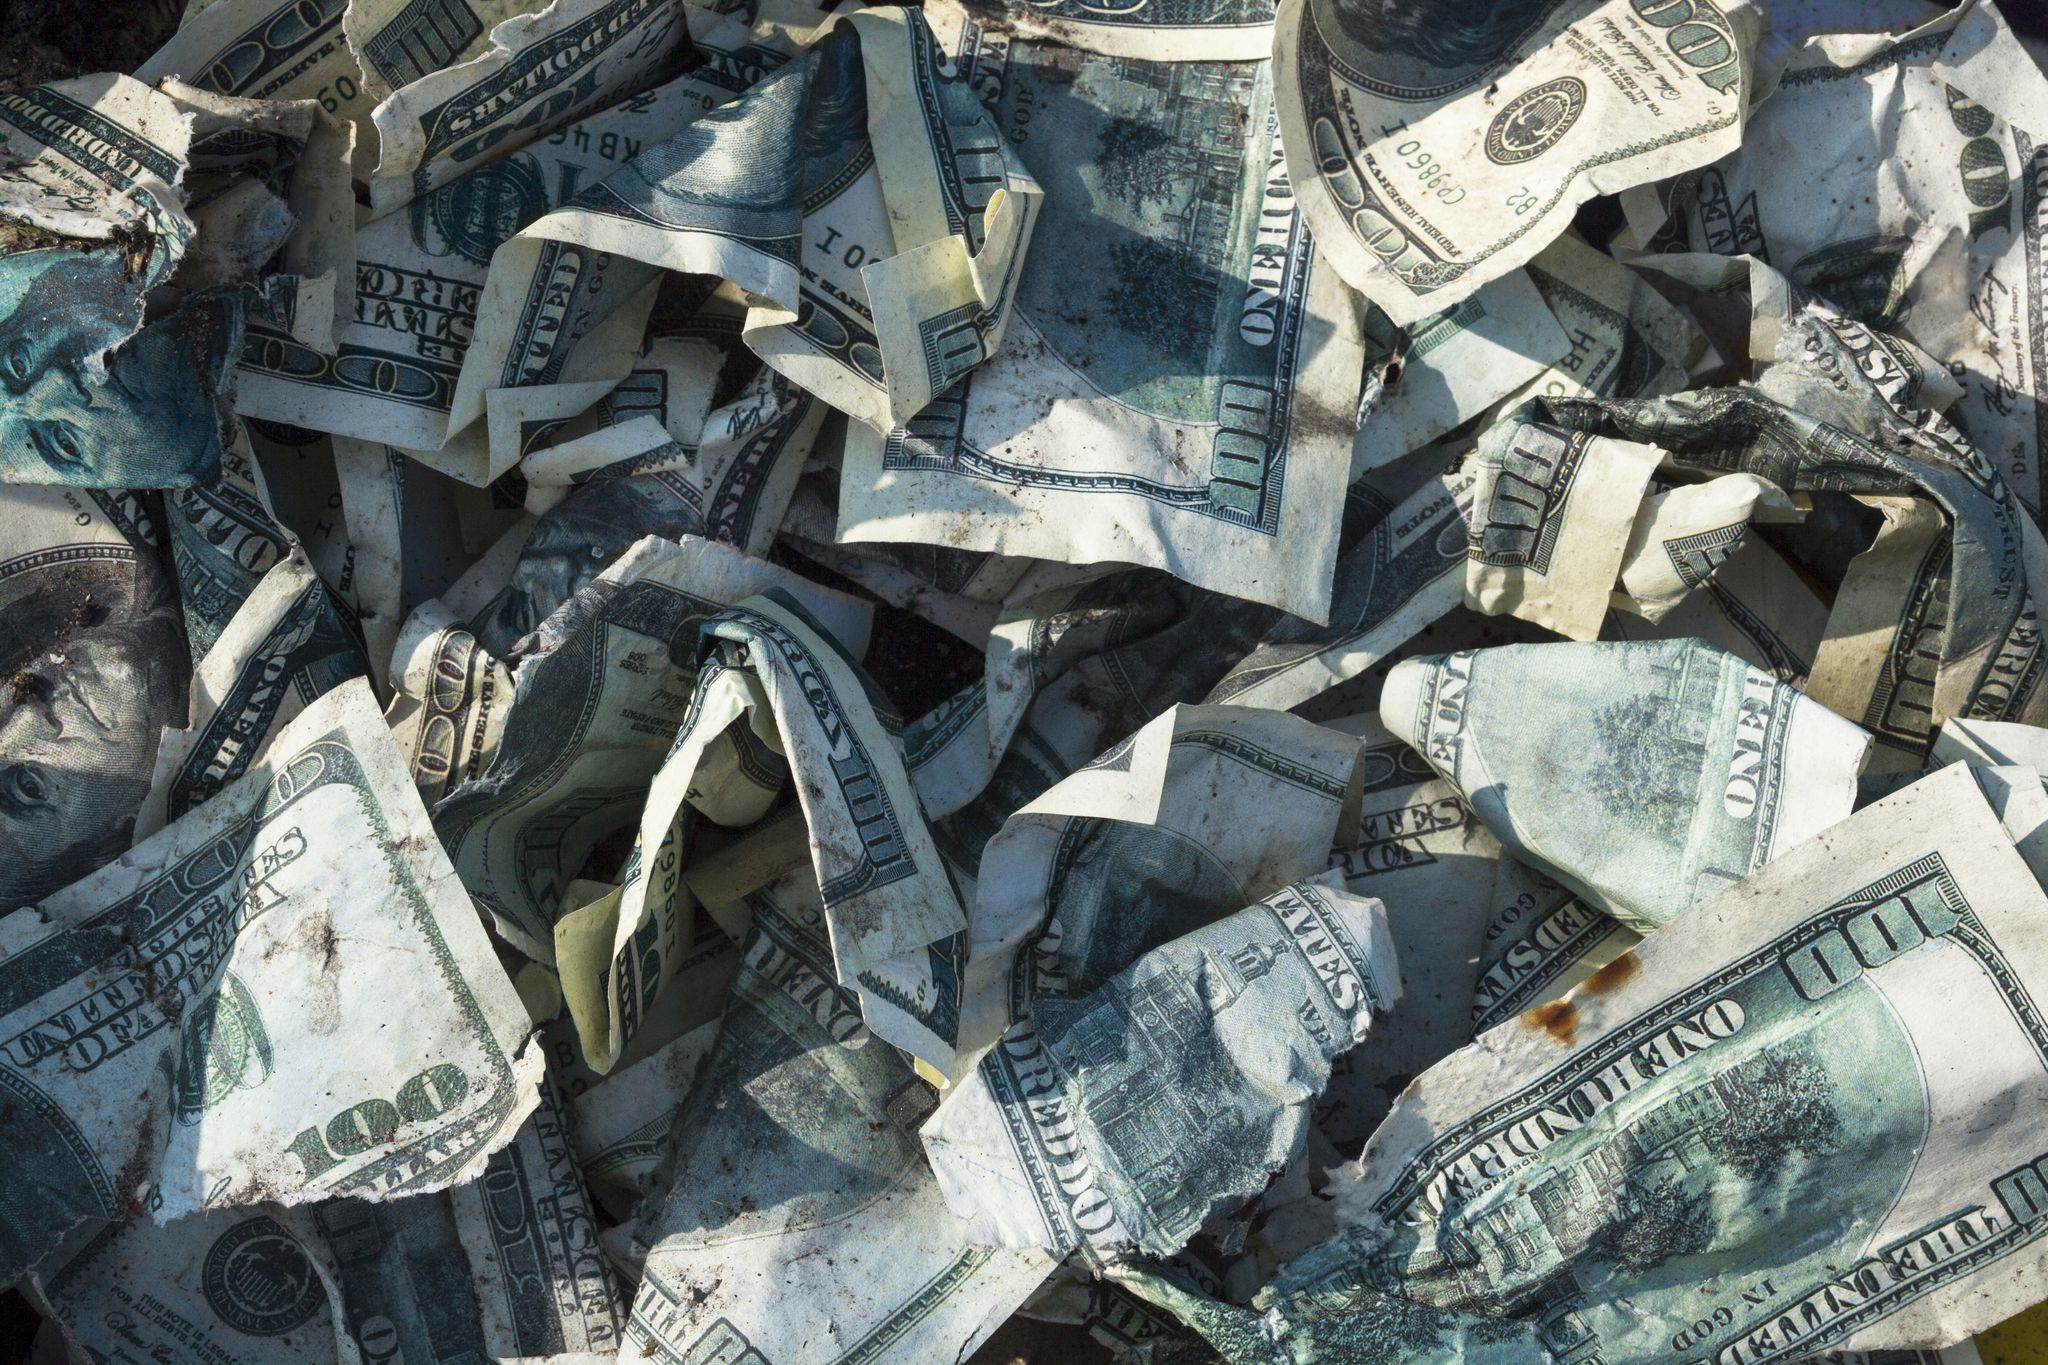 A bunch of dirty and scrunched up $1.00 bills. | Source: Shutterstock